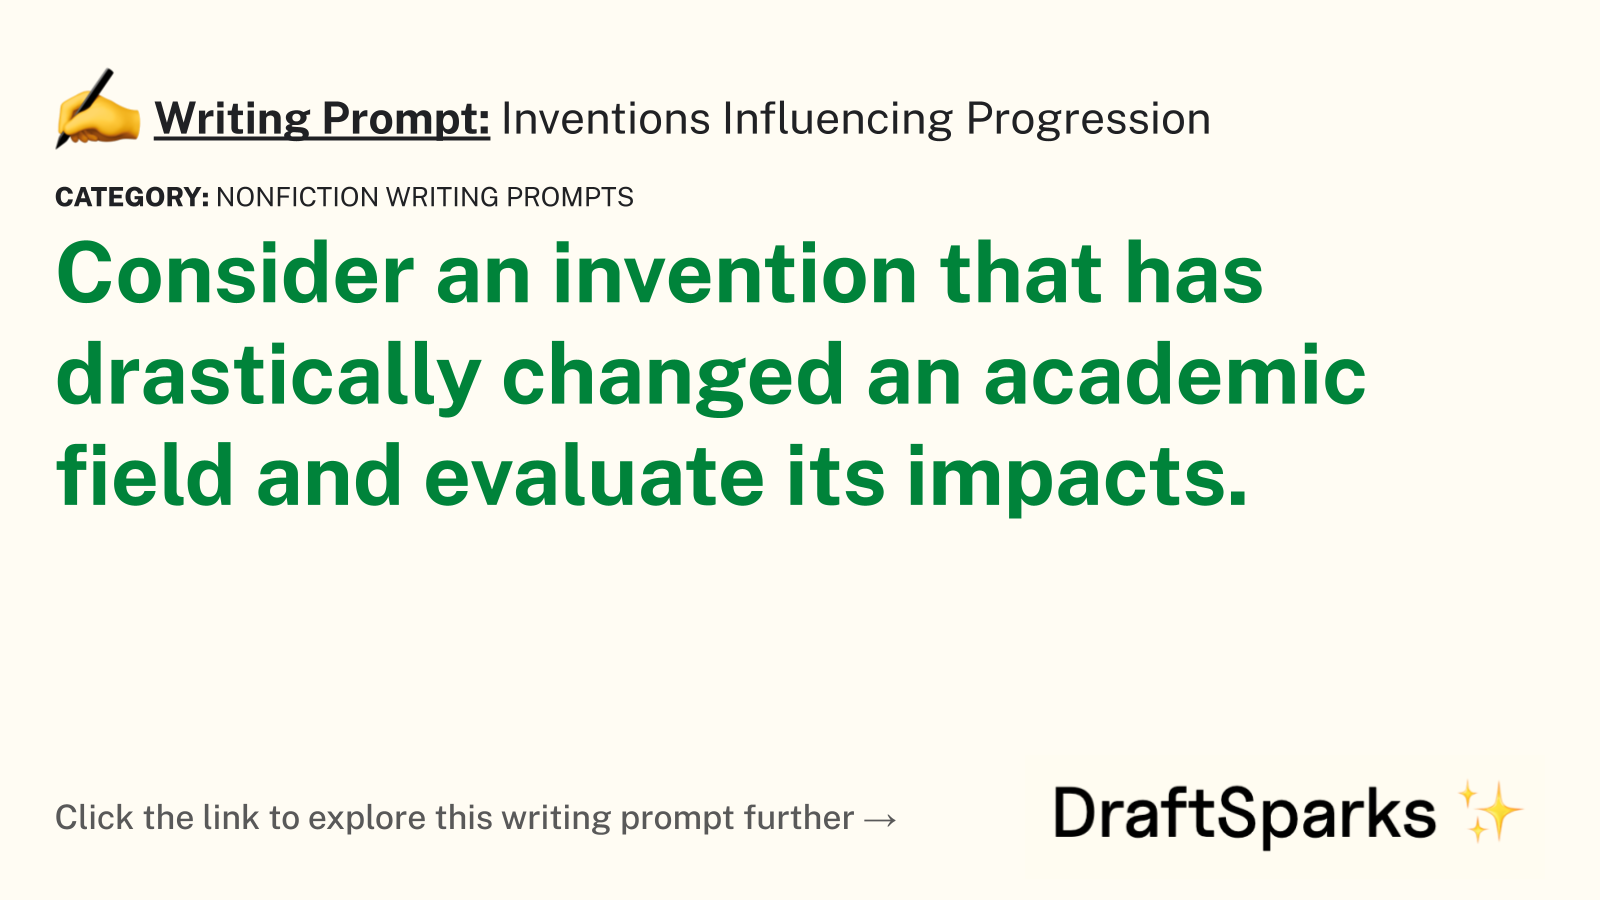 Inventions Influencing Progression